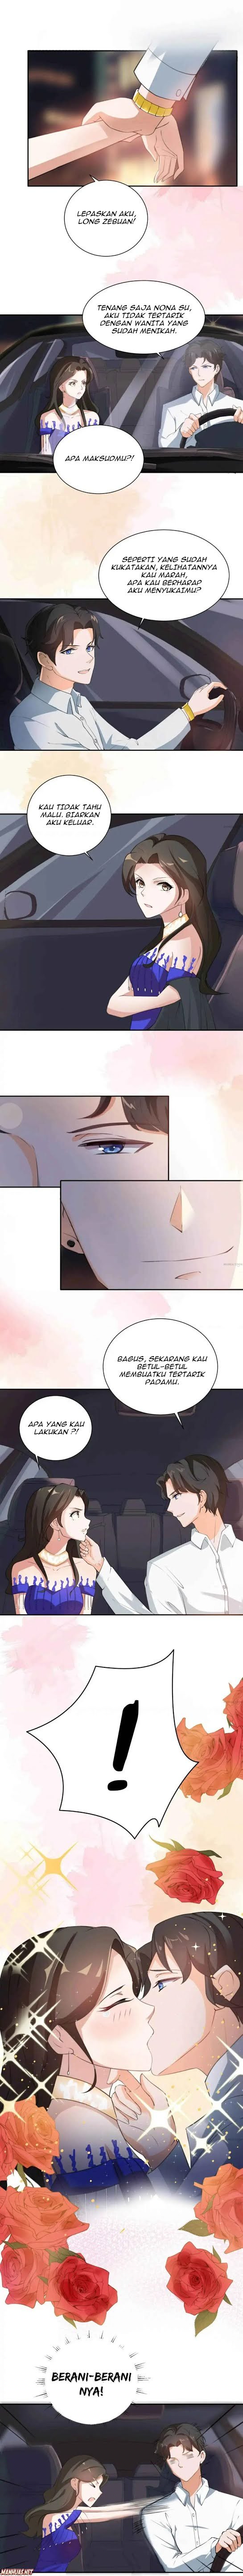 Baca Marry to Find Love Chapter 1  - GudangKomik